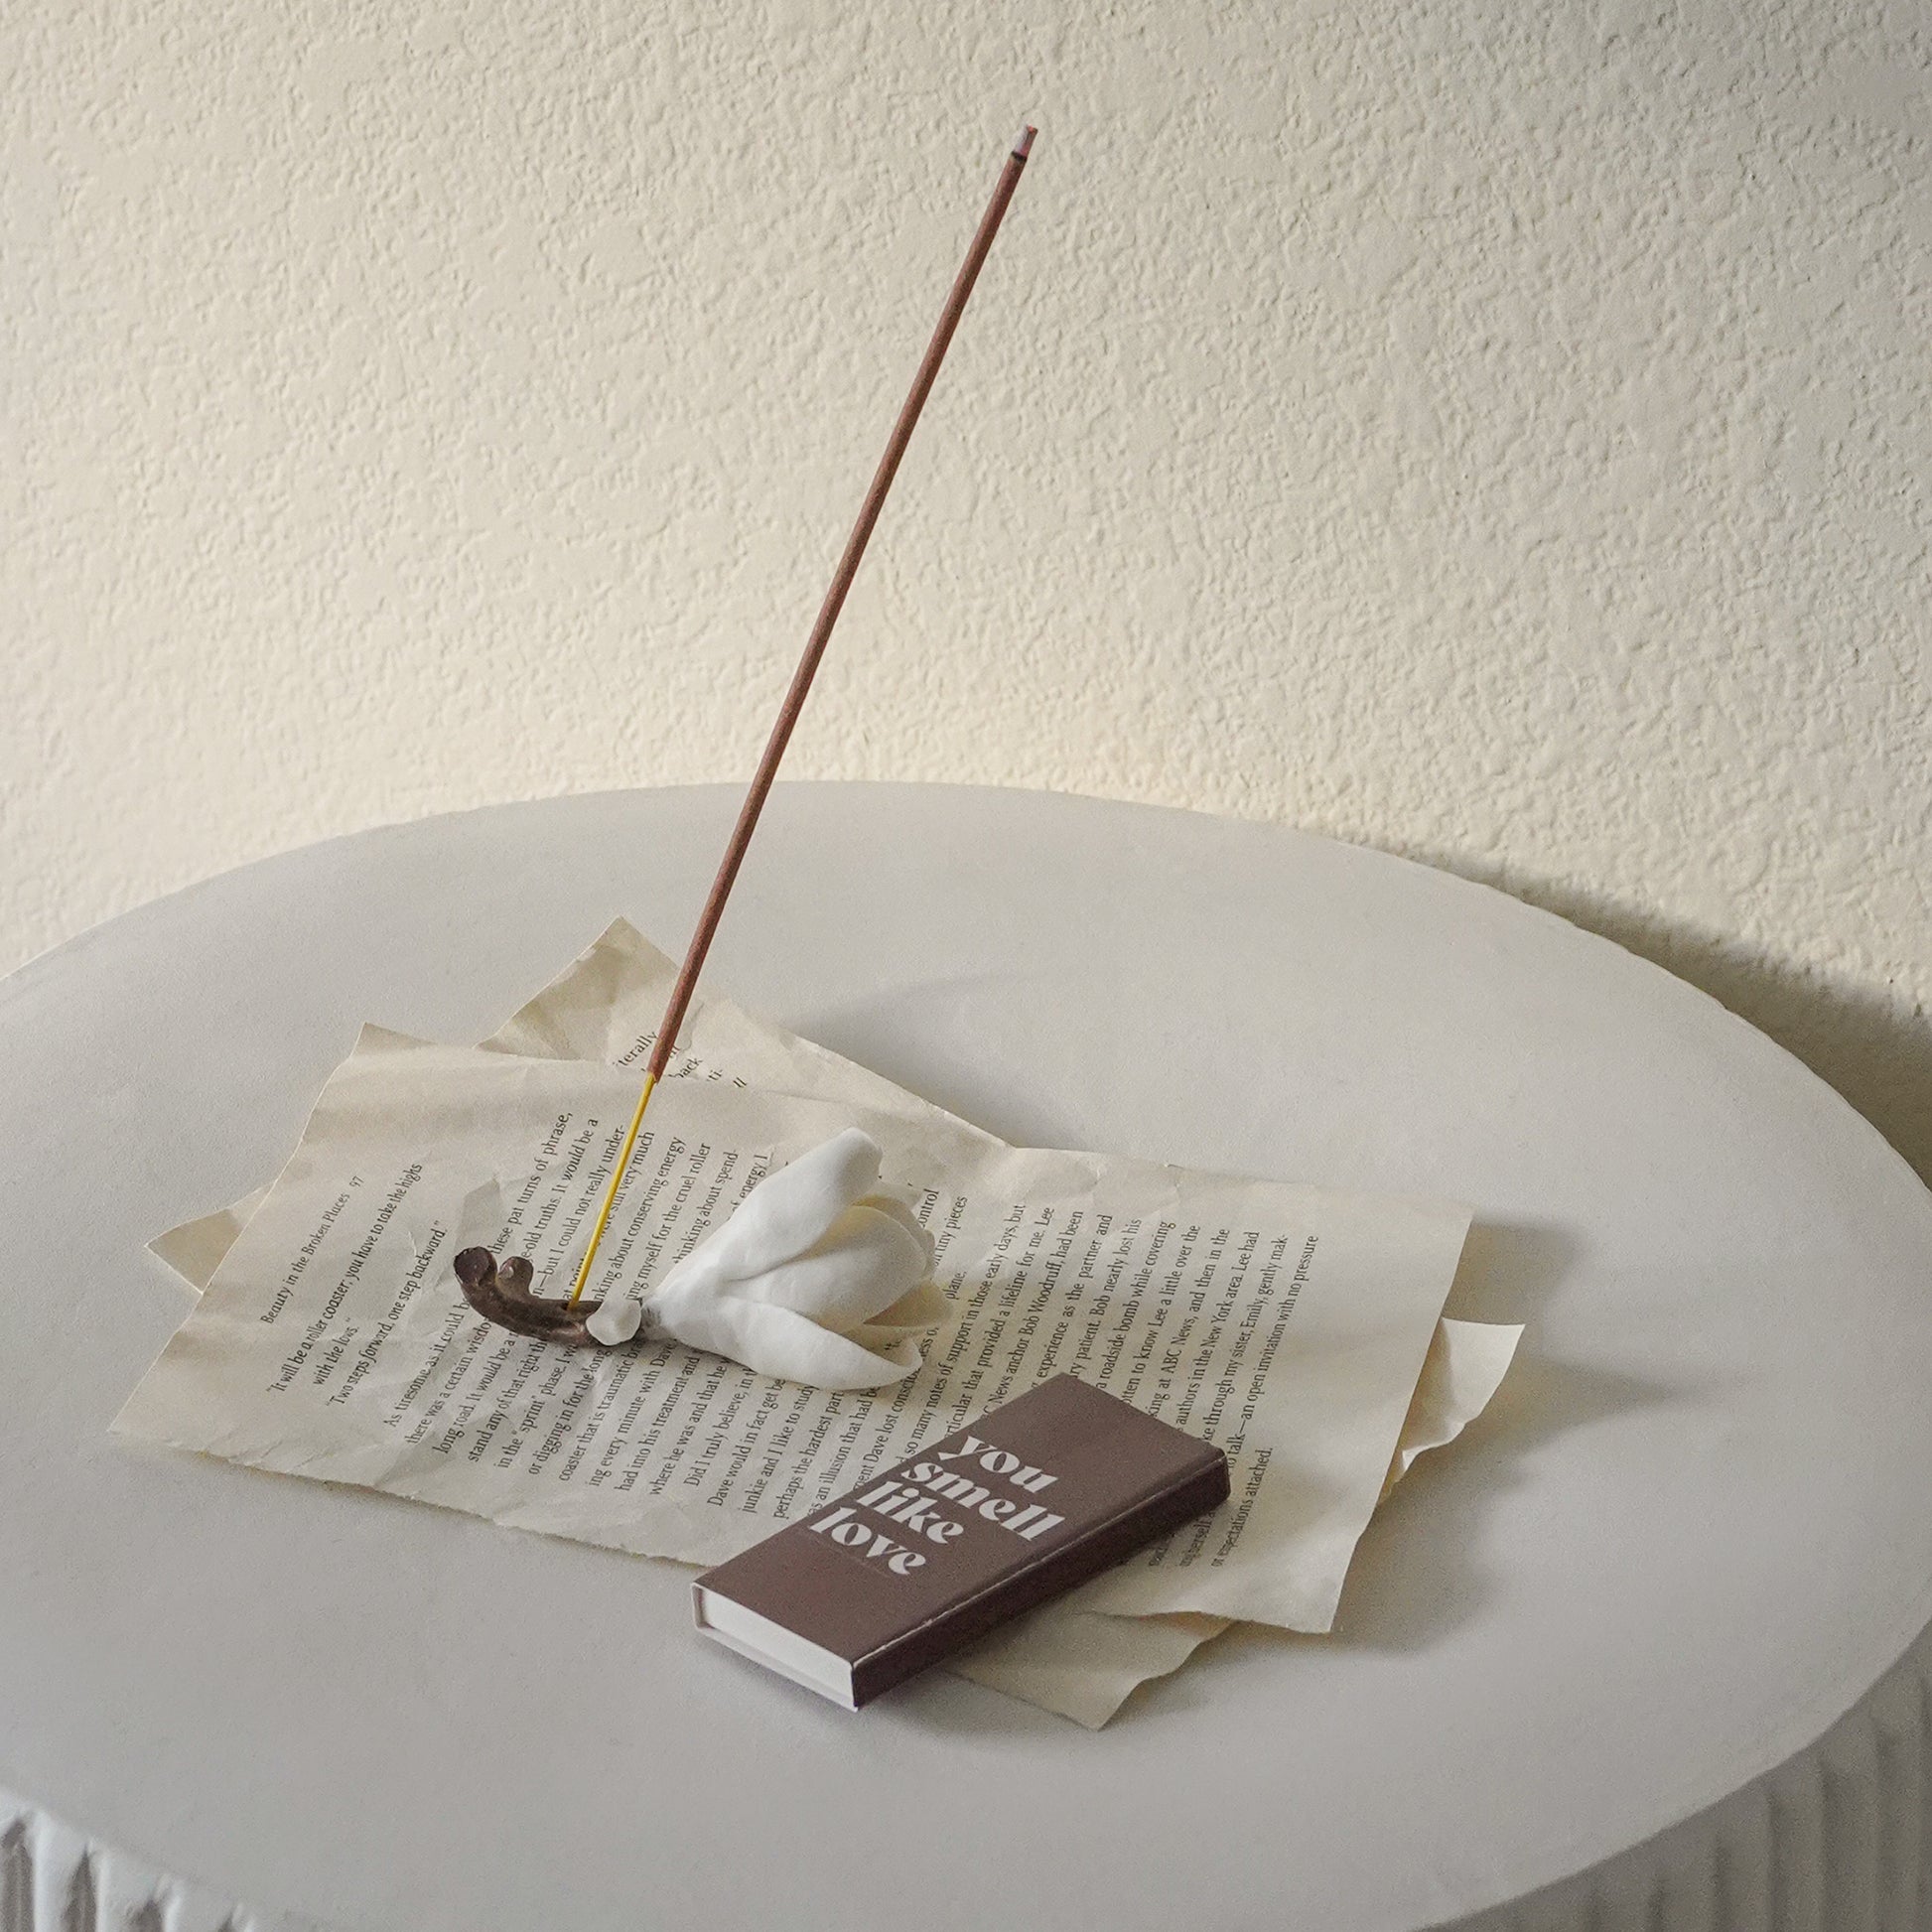 magnolia flower incense holder with an incense stick on book pages and a brown match box inscribed with you smell like love on white end table